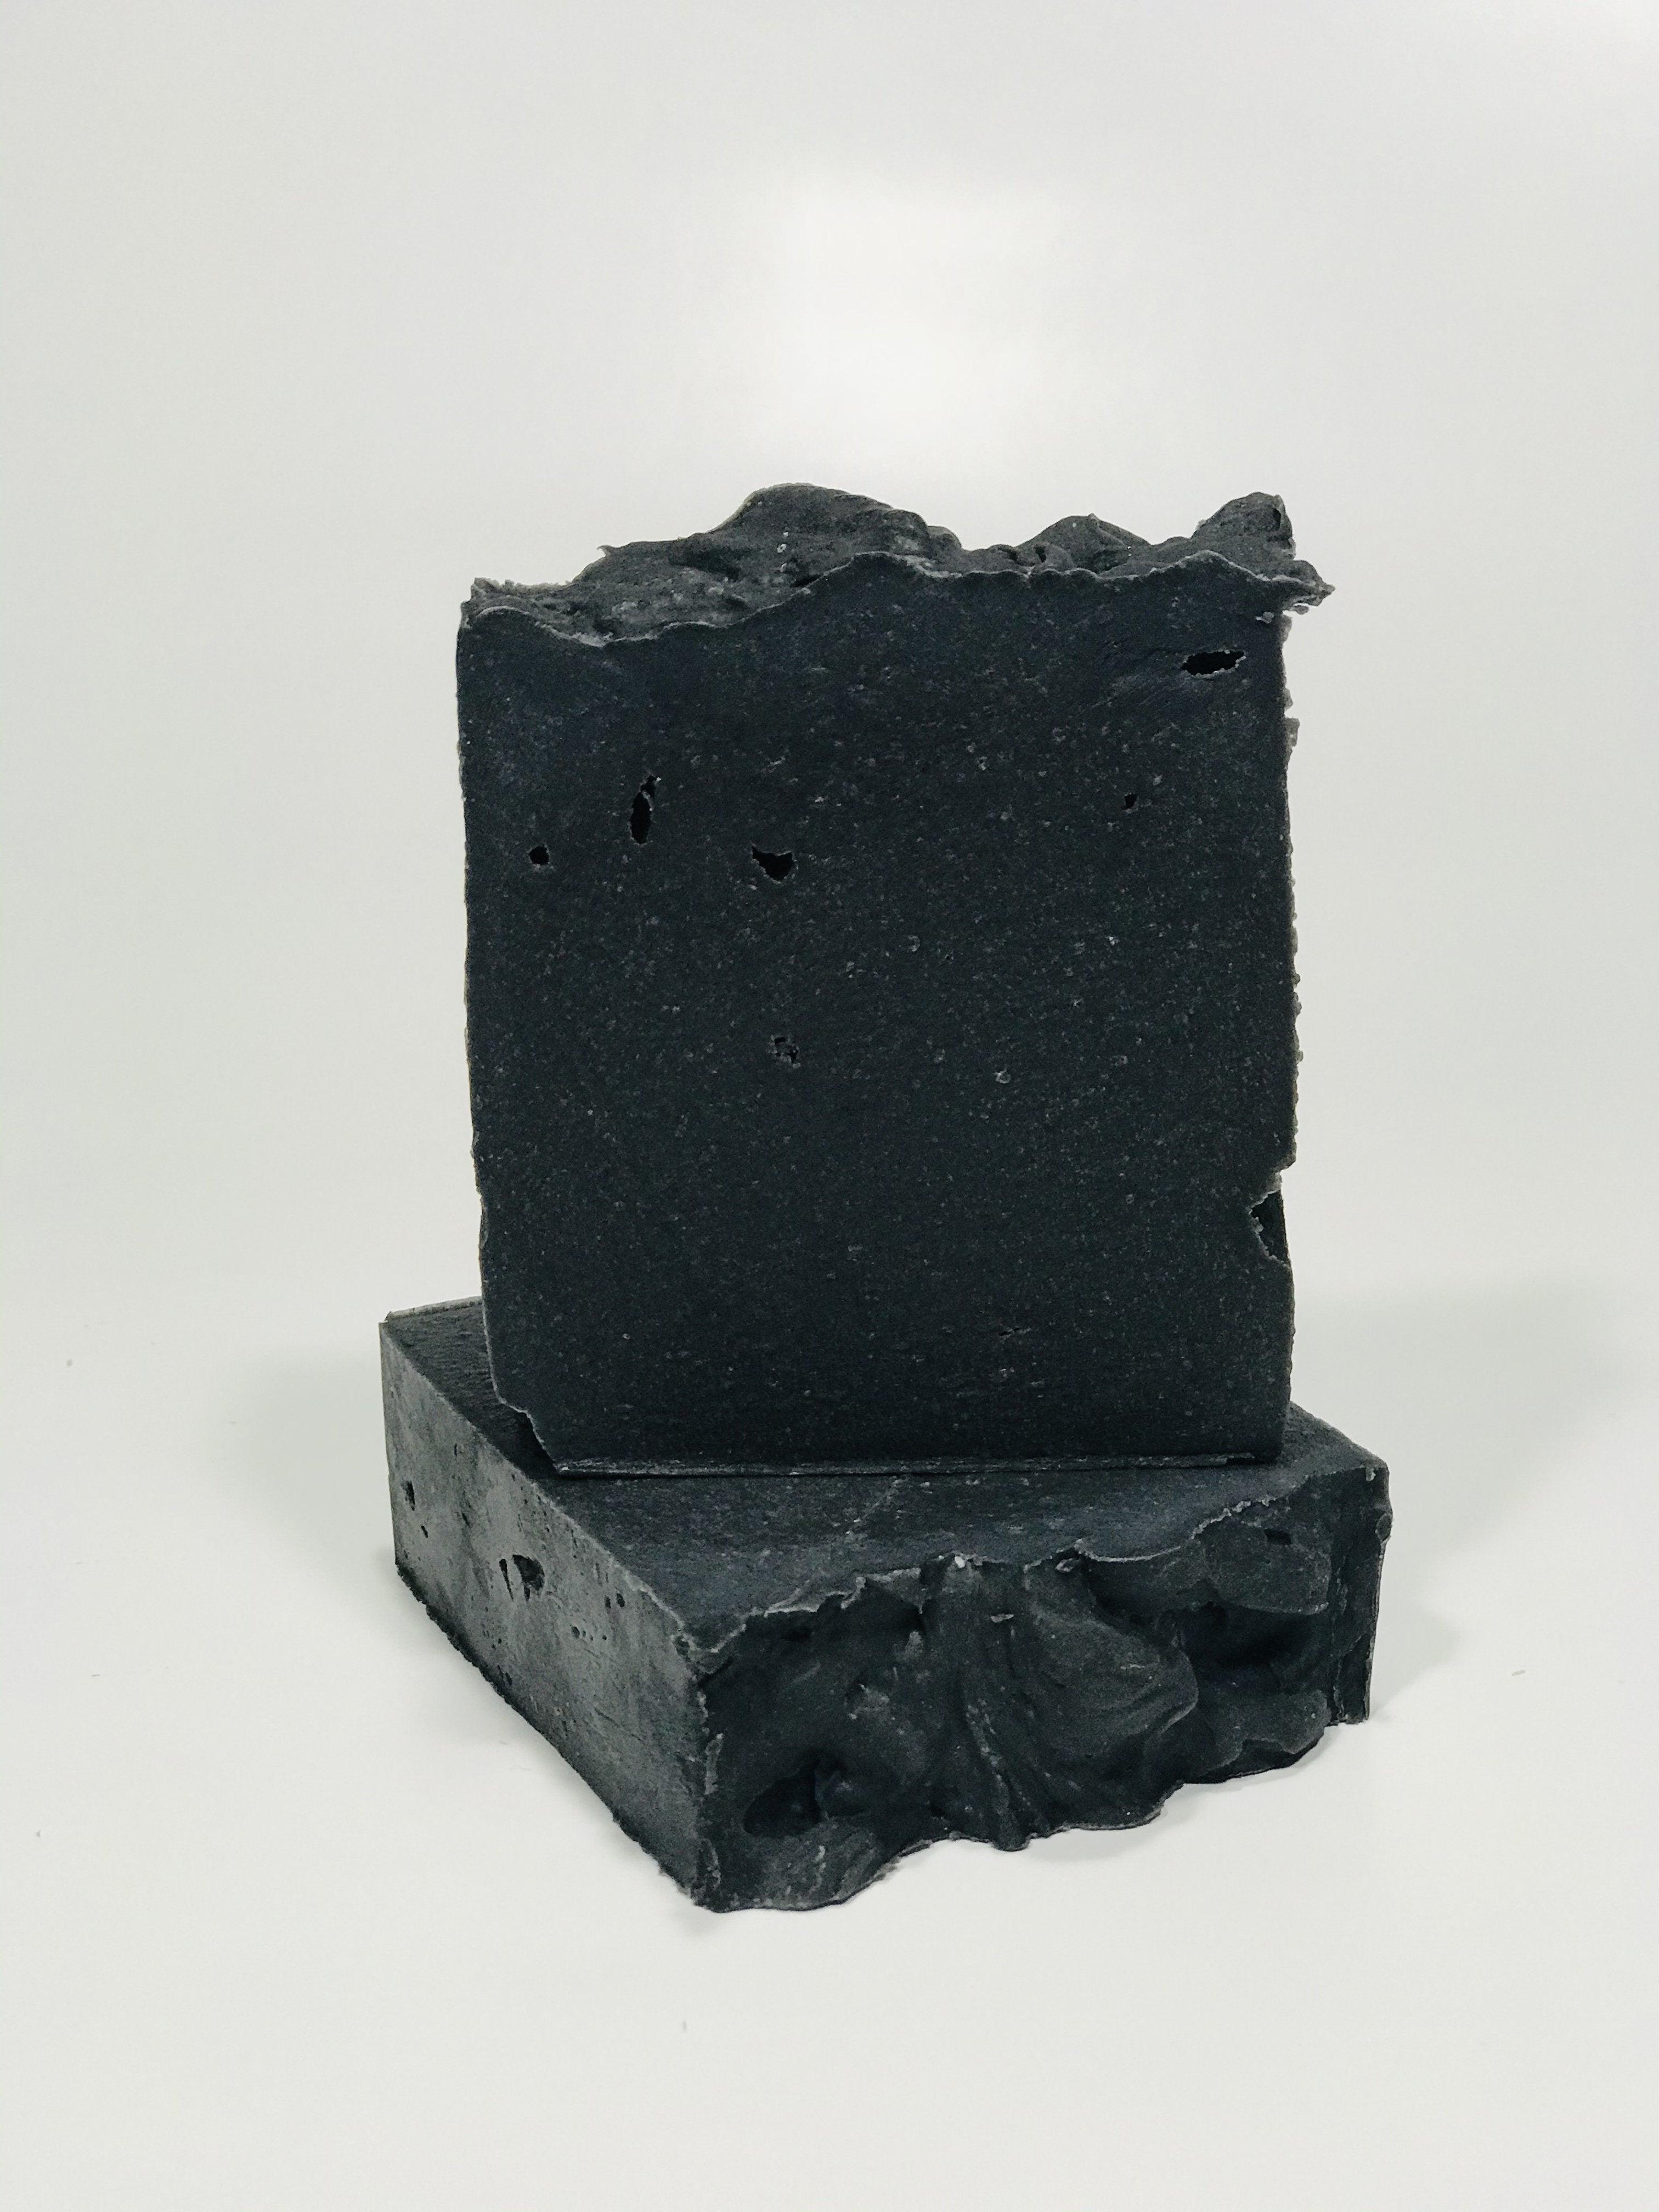 Activated Charcoal - The Coco Shoppe